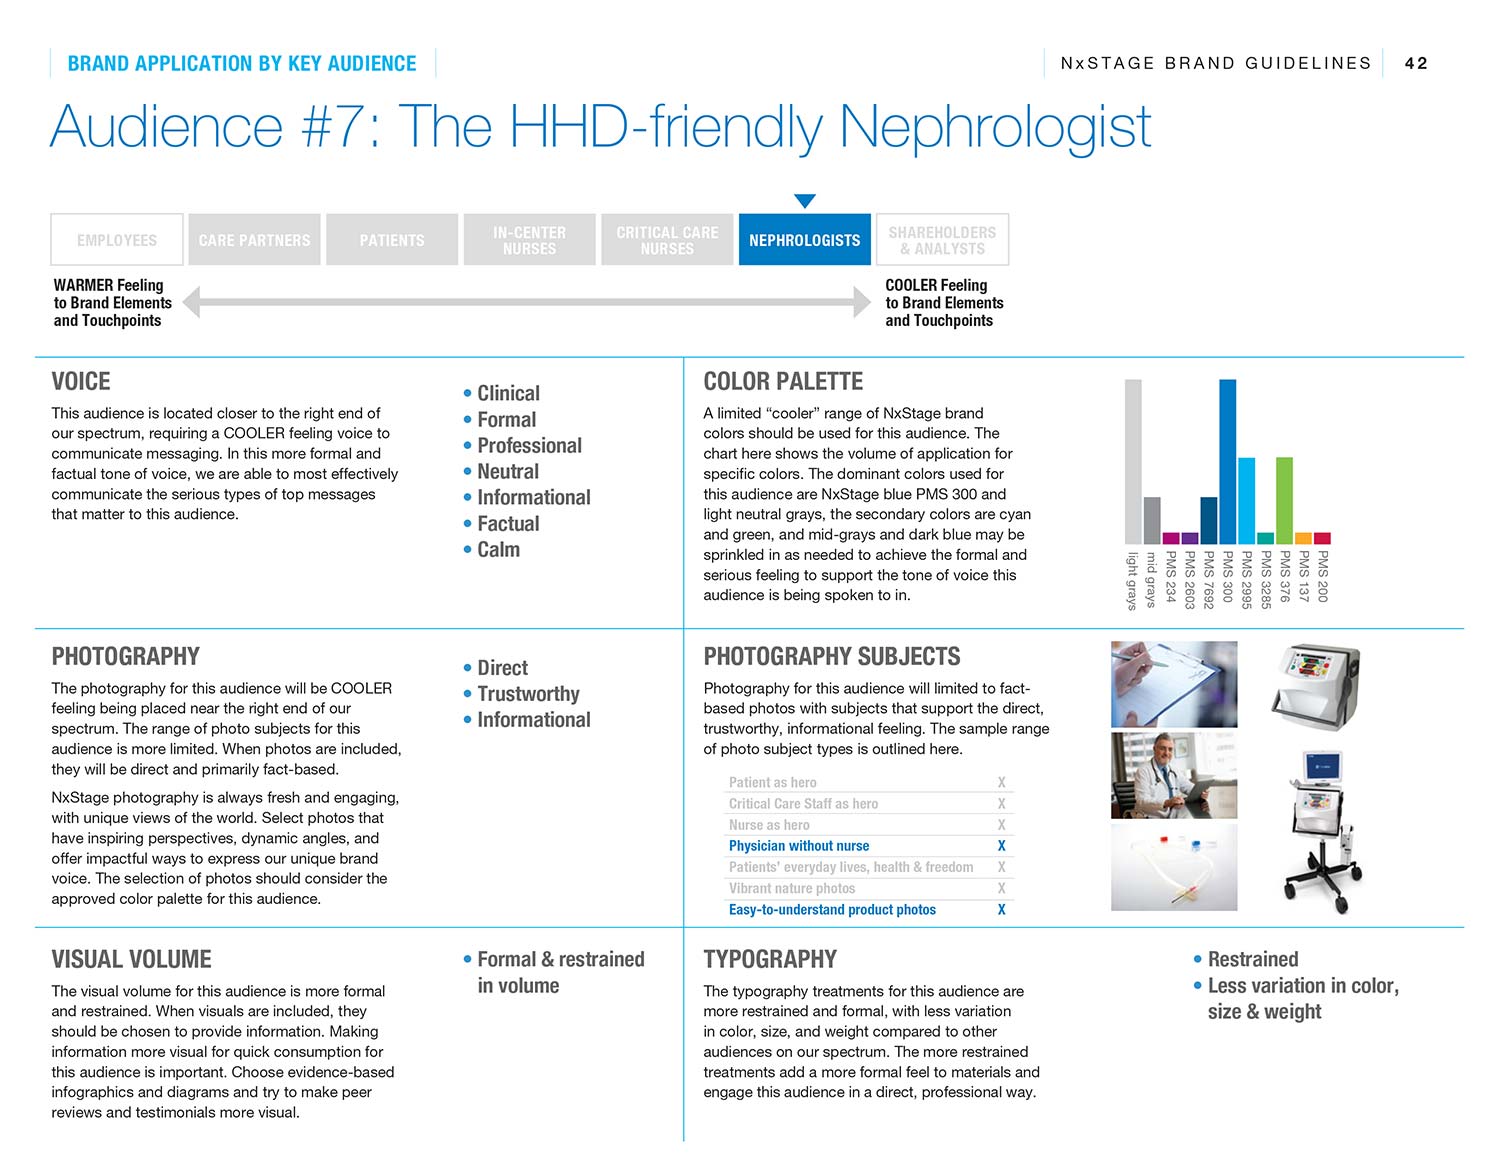 NxStage Brand Guide Audience #7: Nephrologist